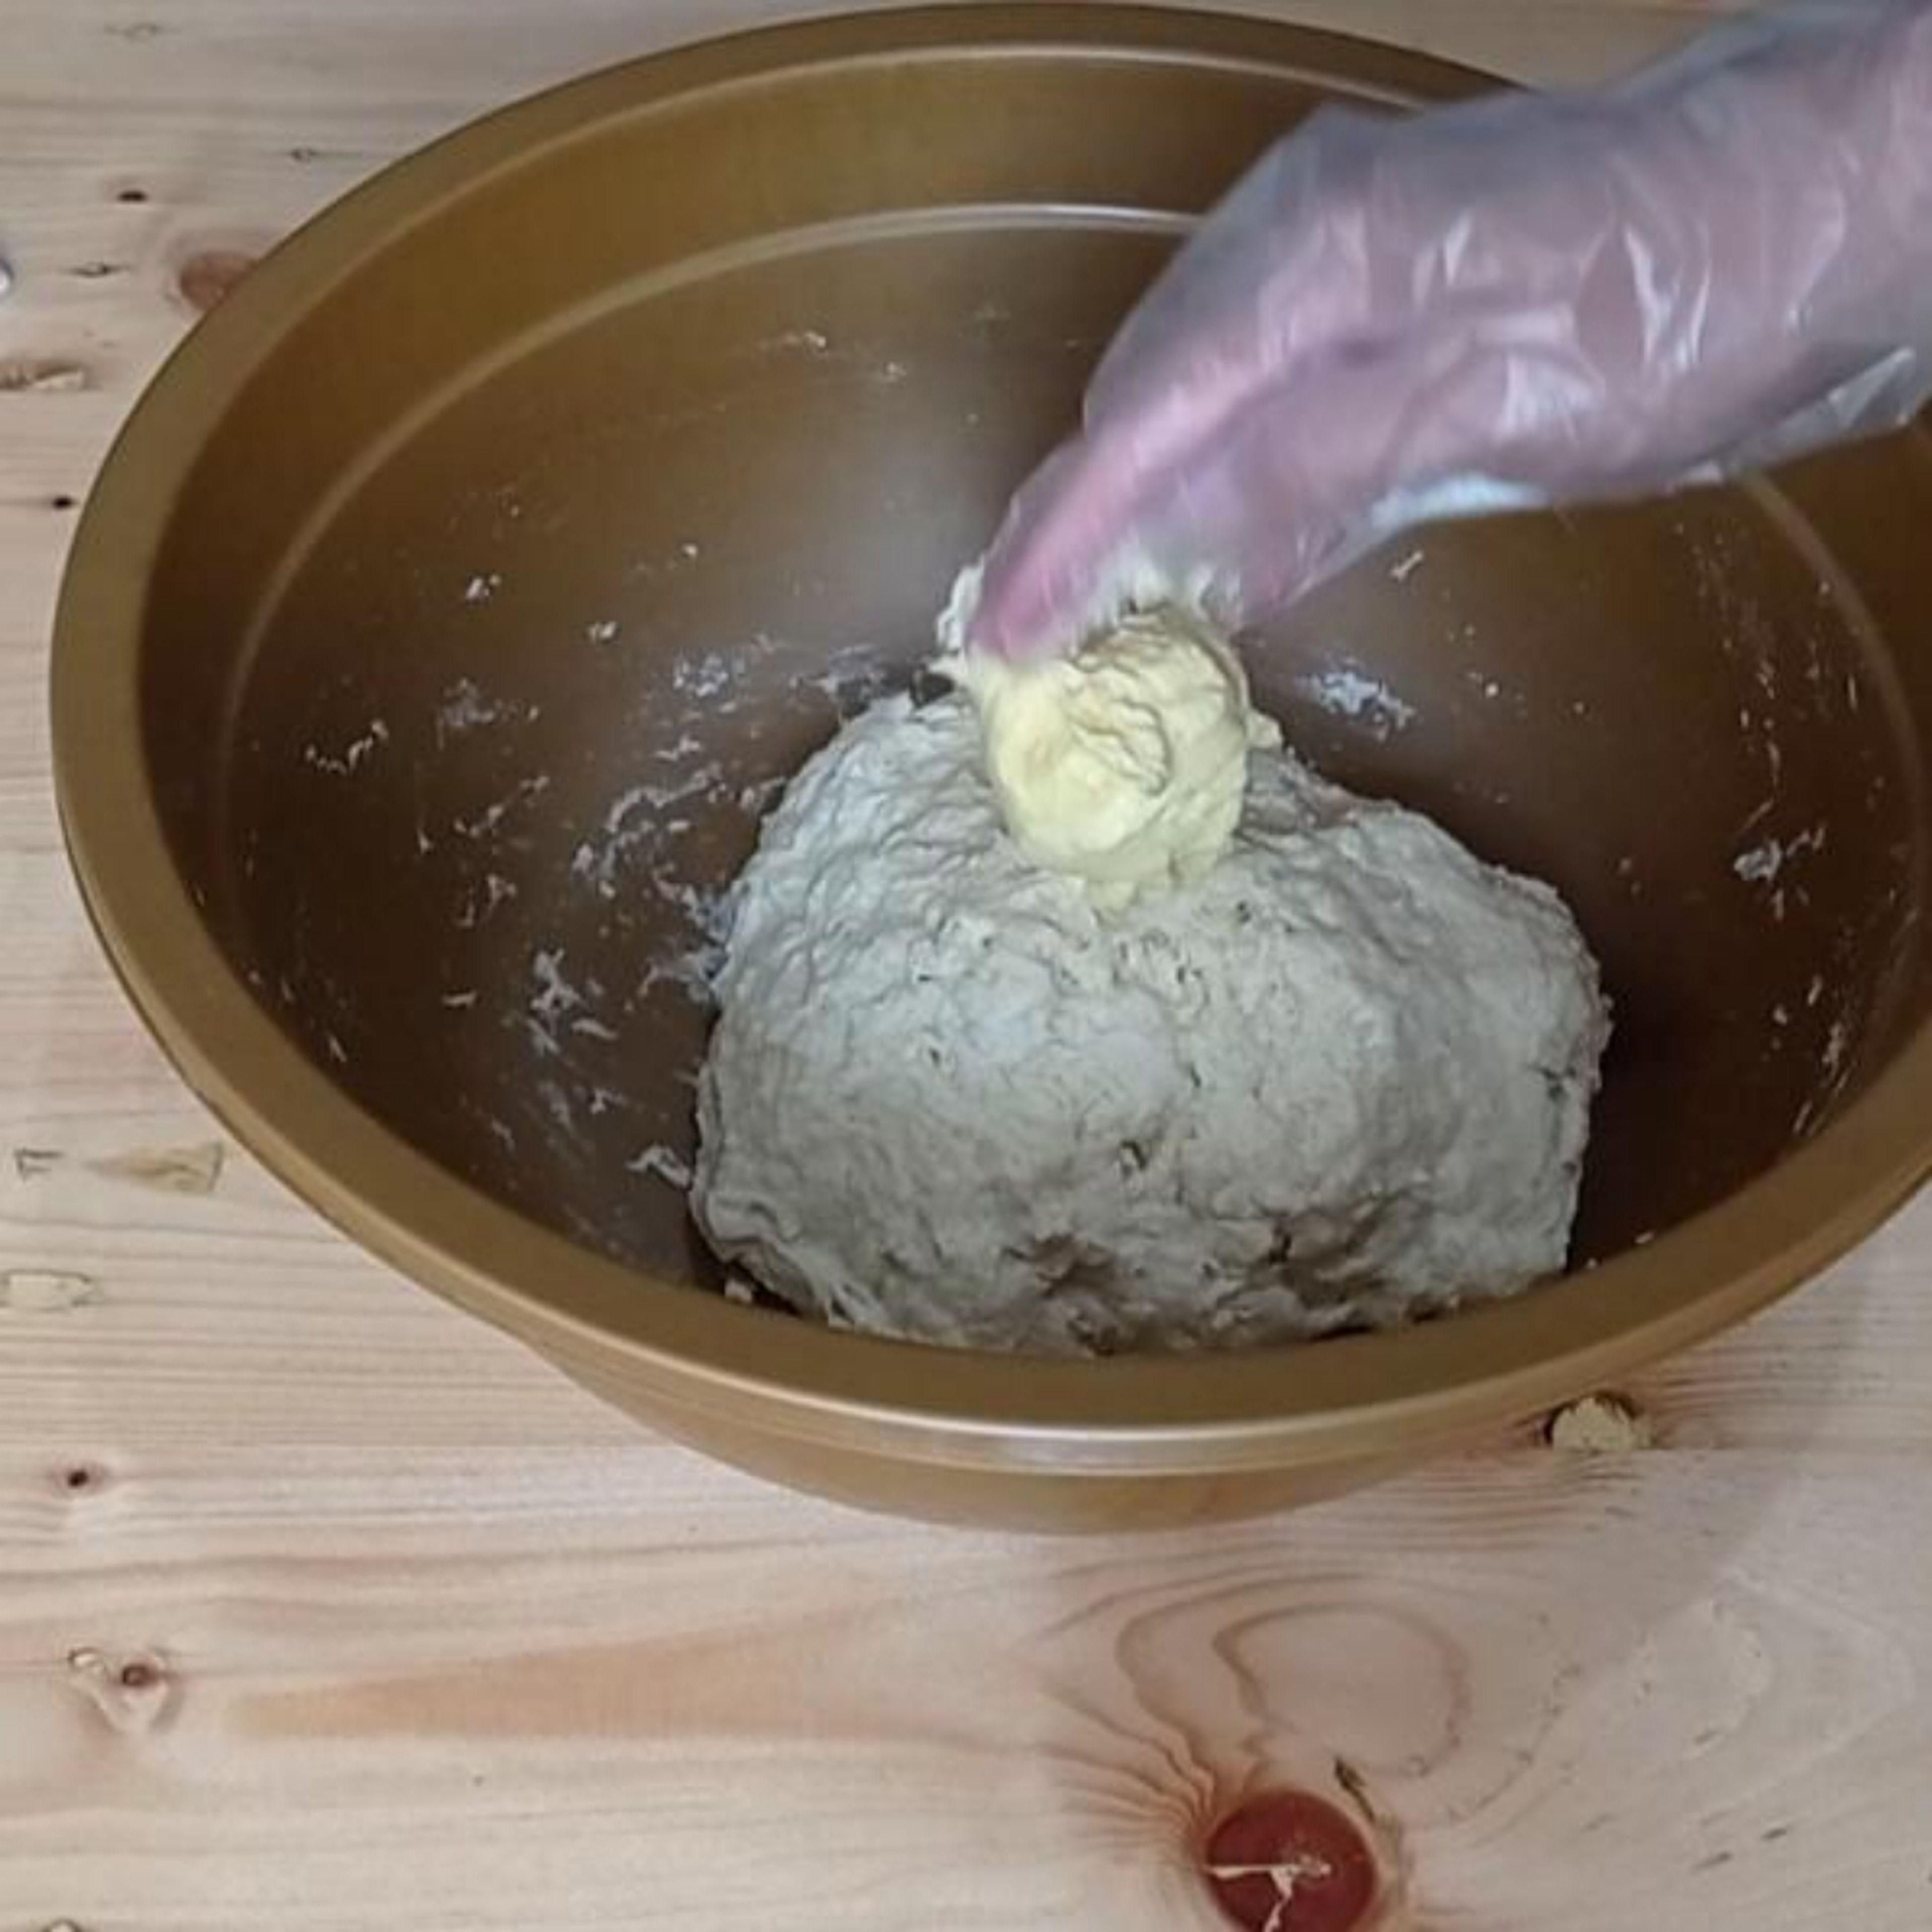 Knead the dough : Add the butter and mix well with your hand. Then transfer the dough on the silicone mat. Knead the dough until smooth and elastic.